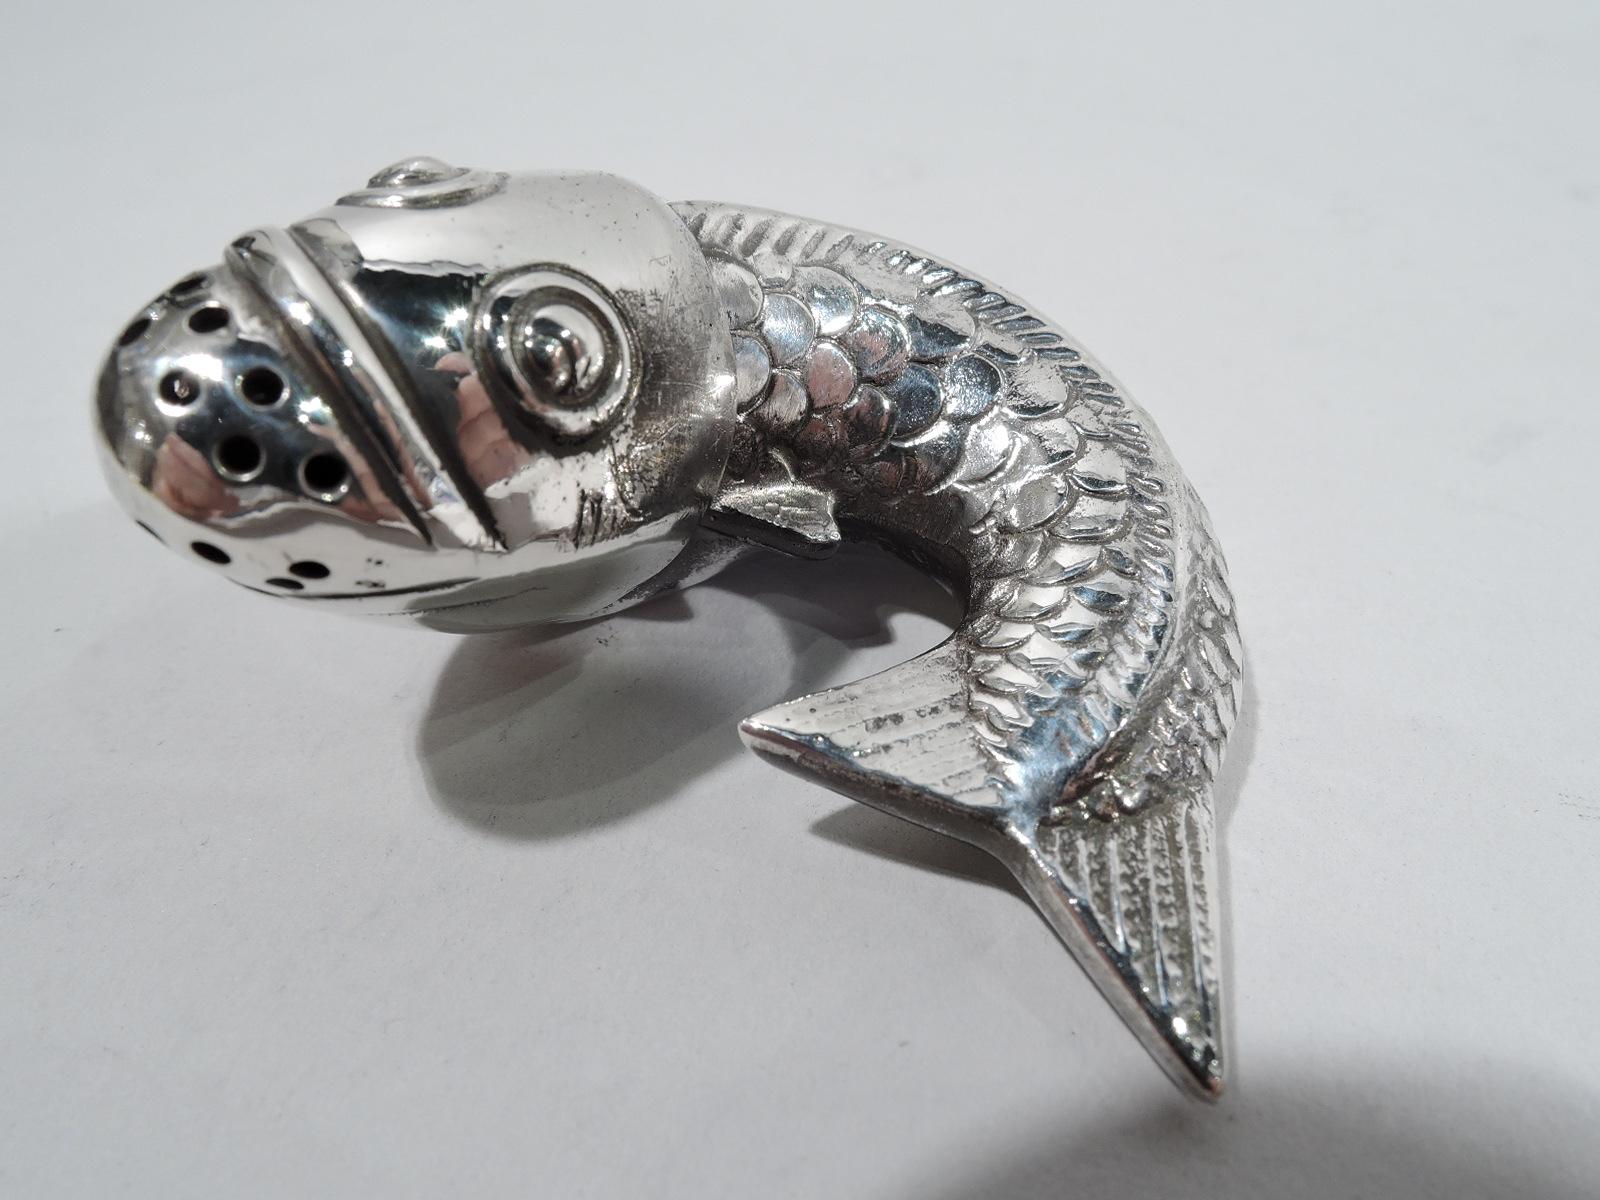 Pair of German Japonesque 800 silver figural salt and pepper shakers, ca 1920. Each: Koi fish form with scaly body and sharp fins. Detachable head with exophthalmic eyes and pierced mouth. Marked. Total weight: 2.3 troy ounces.